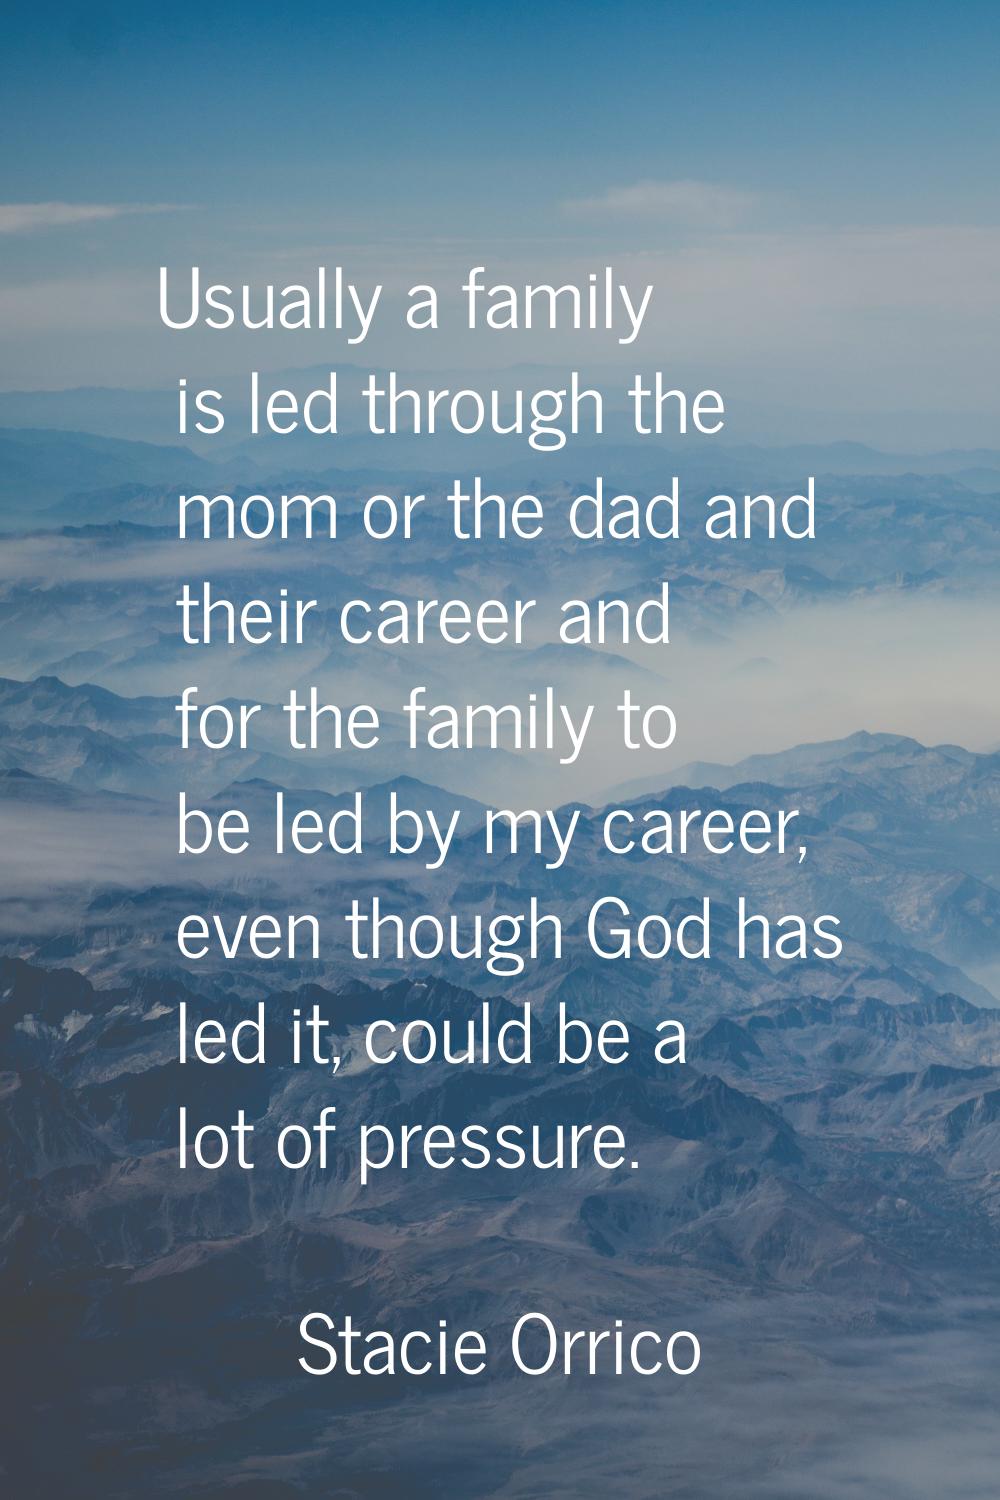 Usually a family is led through the mom or the dad and their career and for the family to be led by